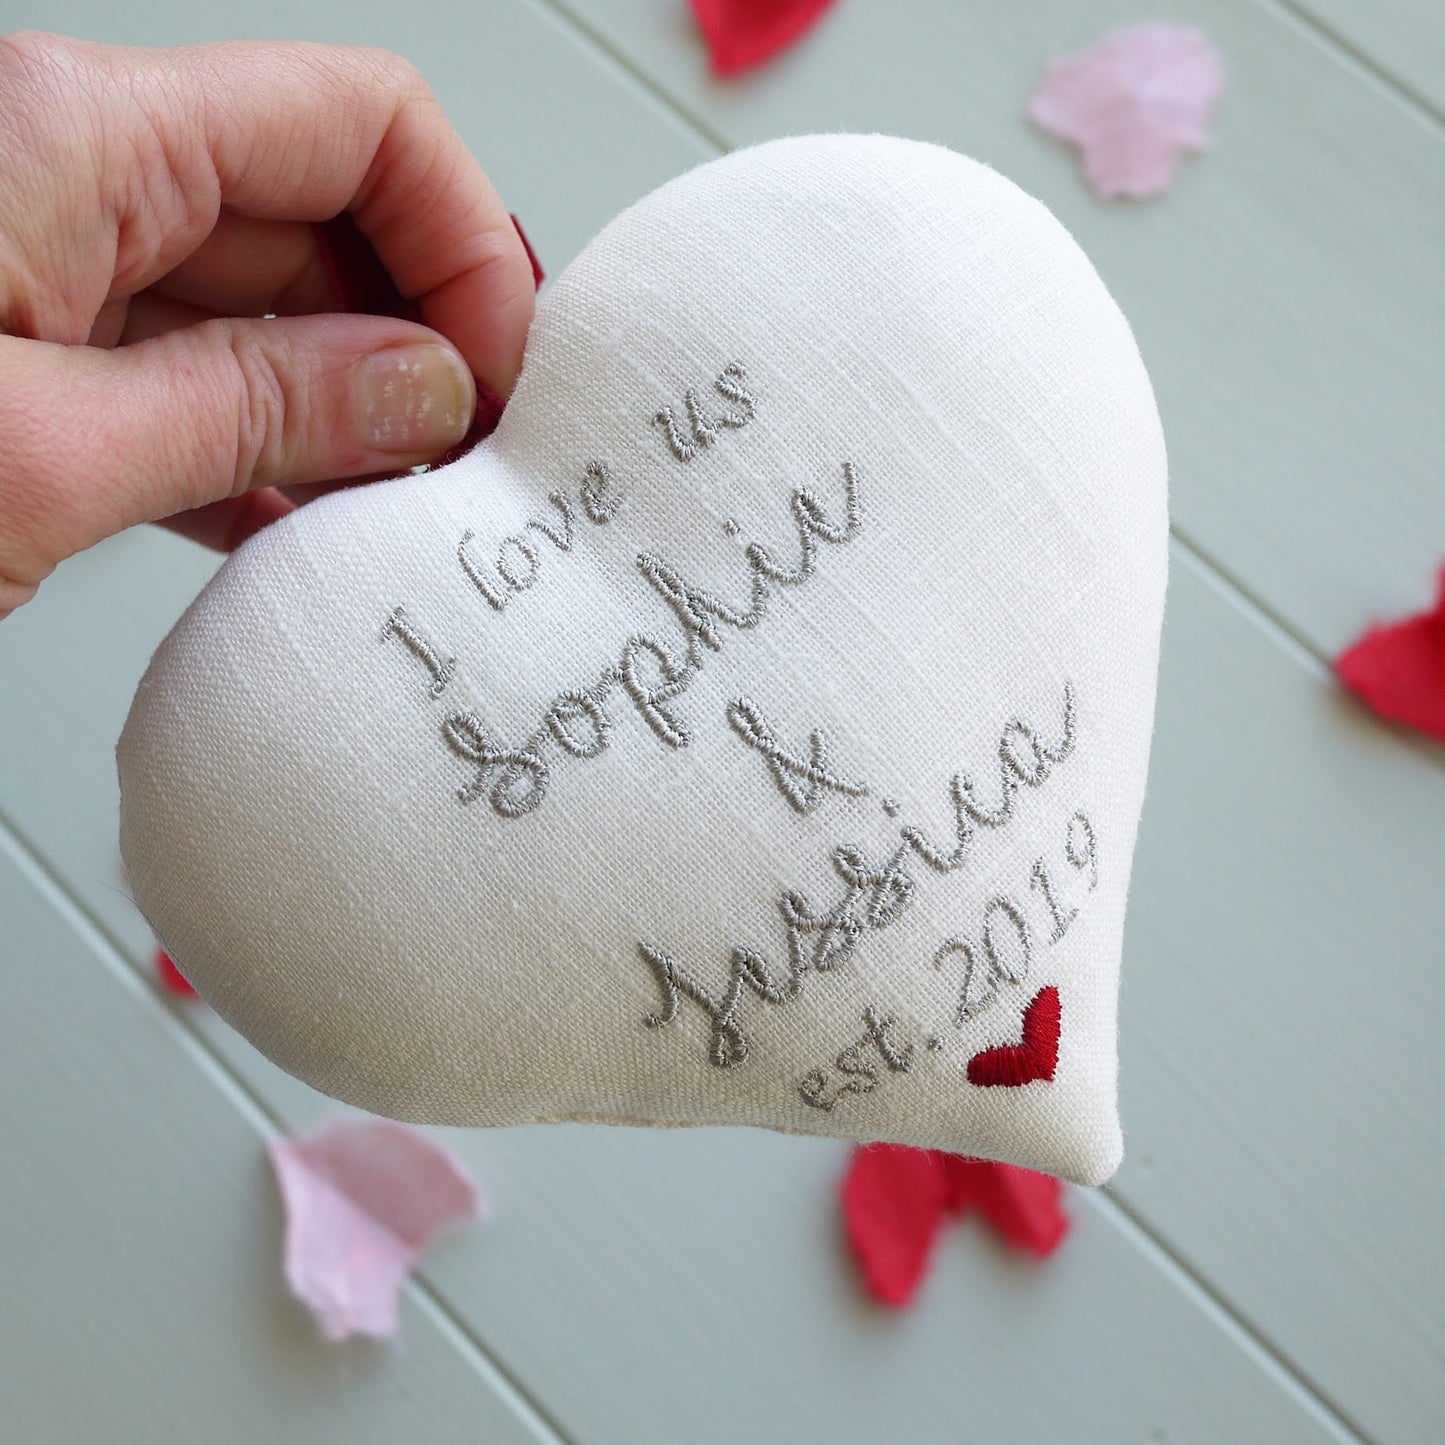 Valentines Day ’I Love Us’ Gift Heart with Tiny Photo Frame Personalised Valentine’s Day Gifts